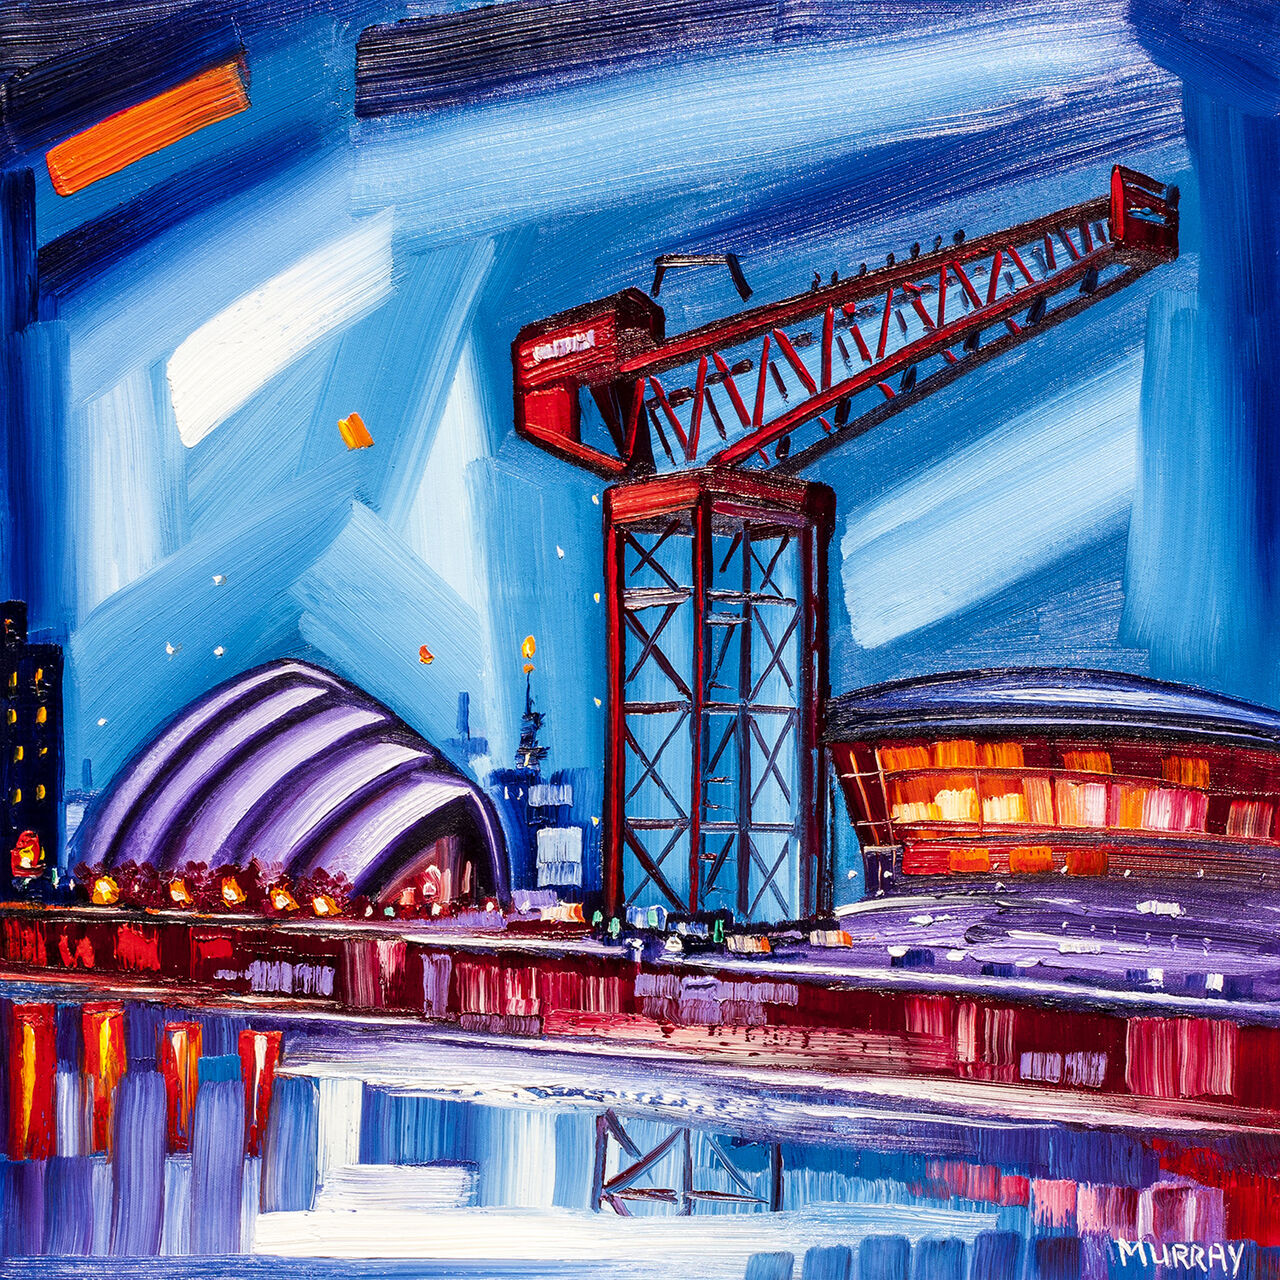 The image depicts a vibrant, expressionist-style painting of an industrial scene featuring a crane, buildings, and reflective water. By Raymond Murray